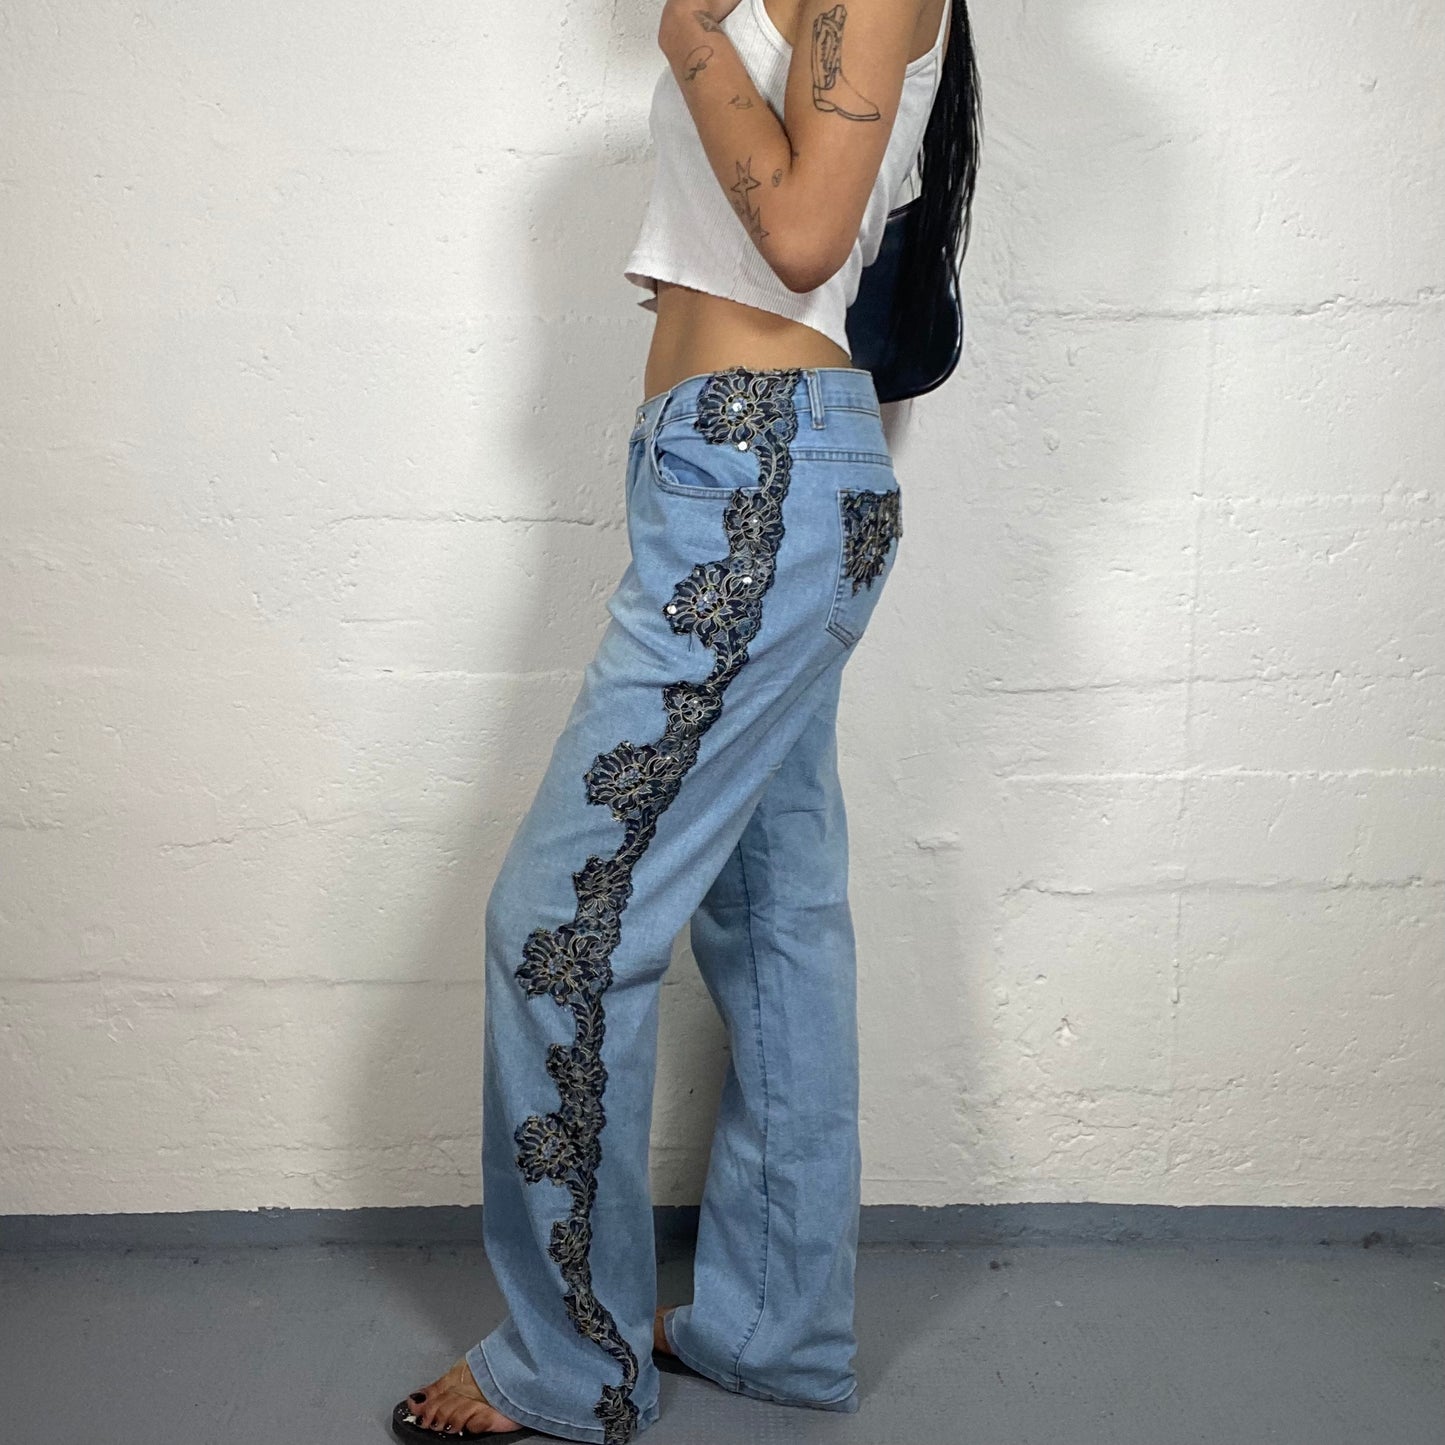 Vintage 2000's Casual Boho Light Blue Straight Cut Jeans with Floral Shiny Embroidery (M)